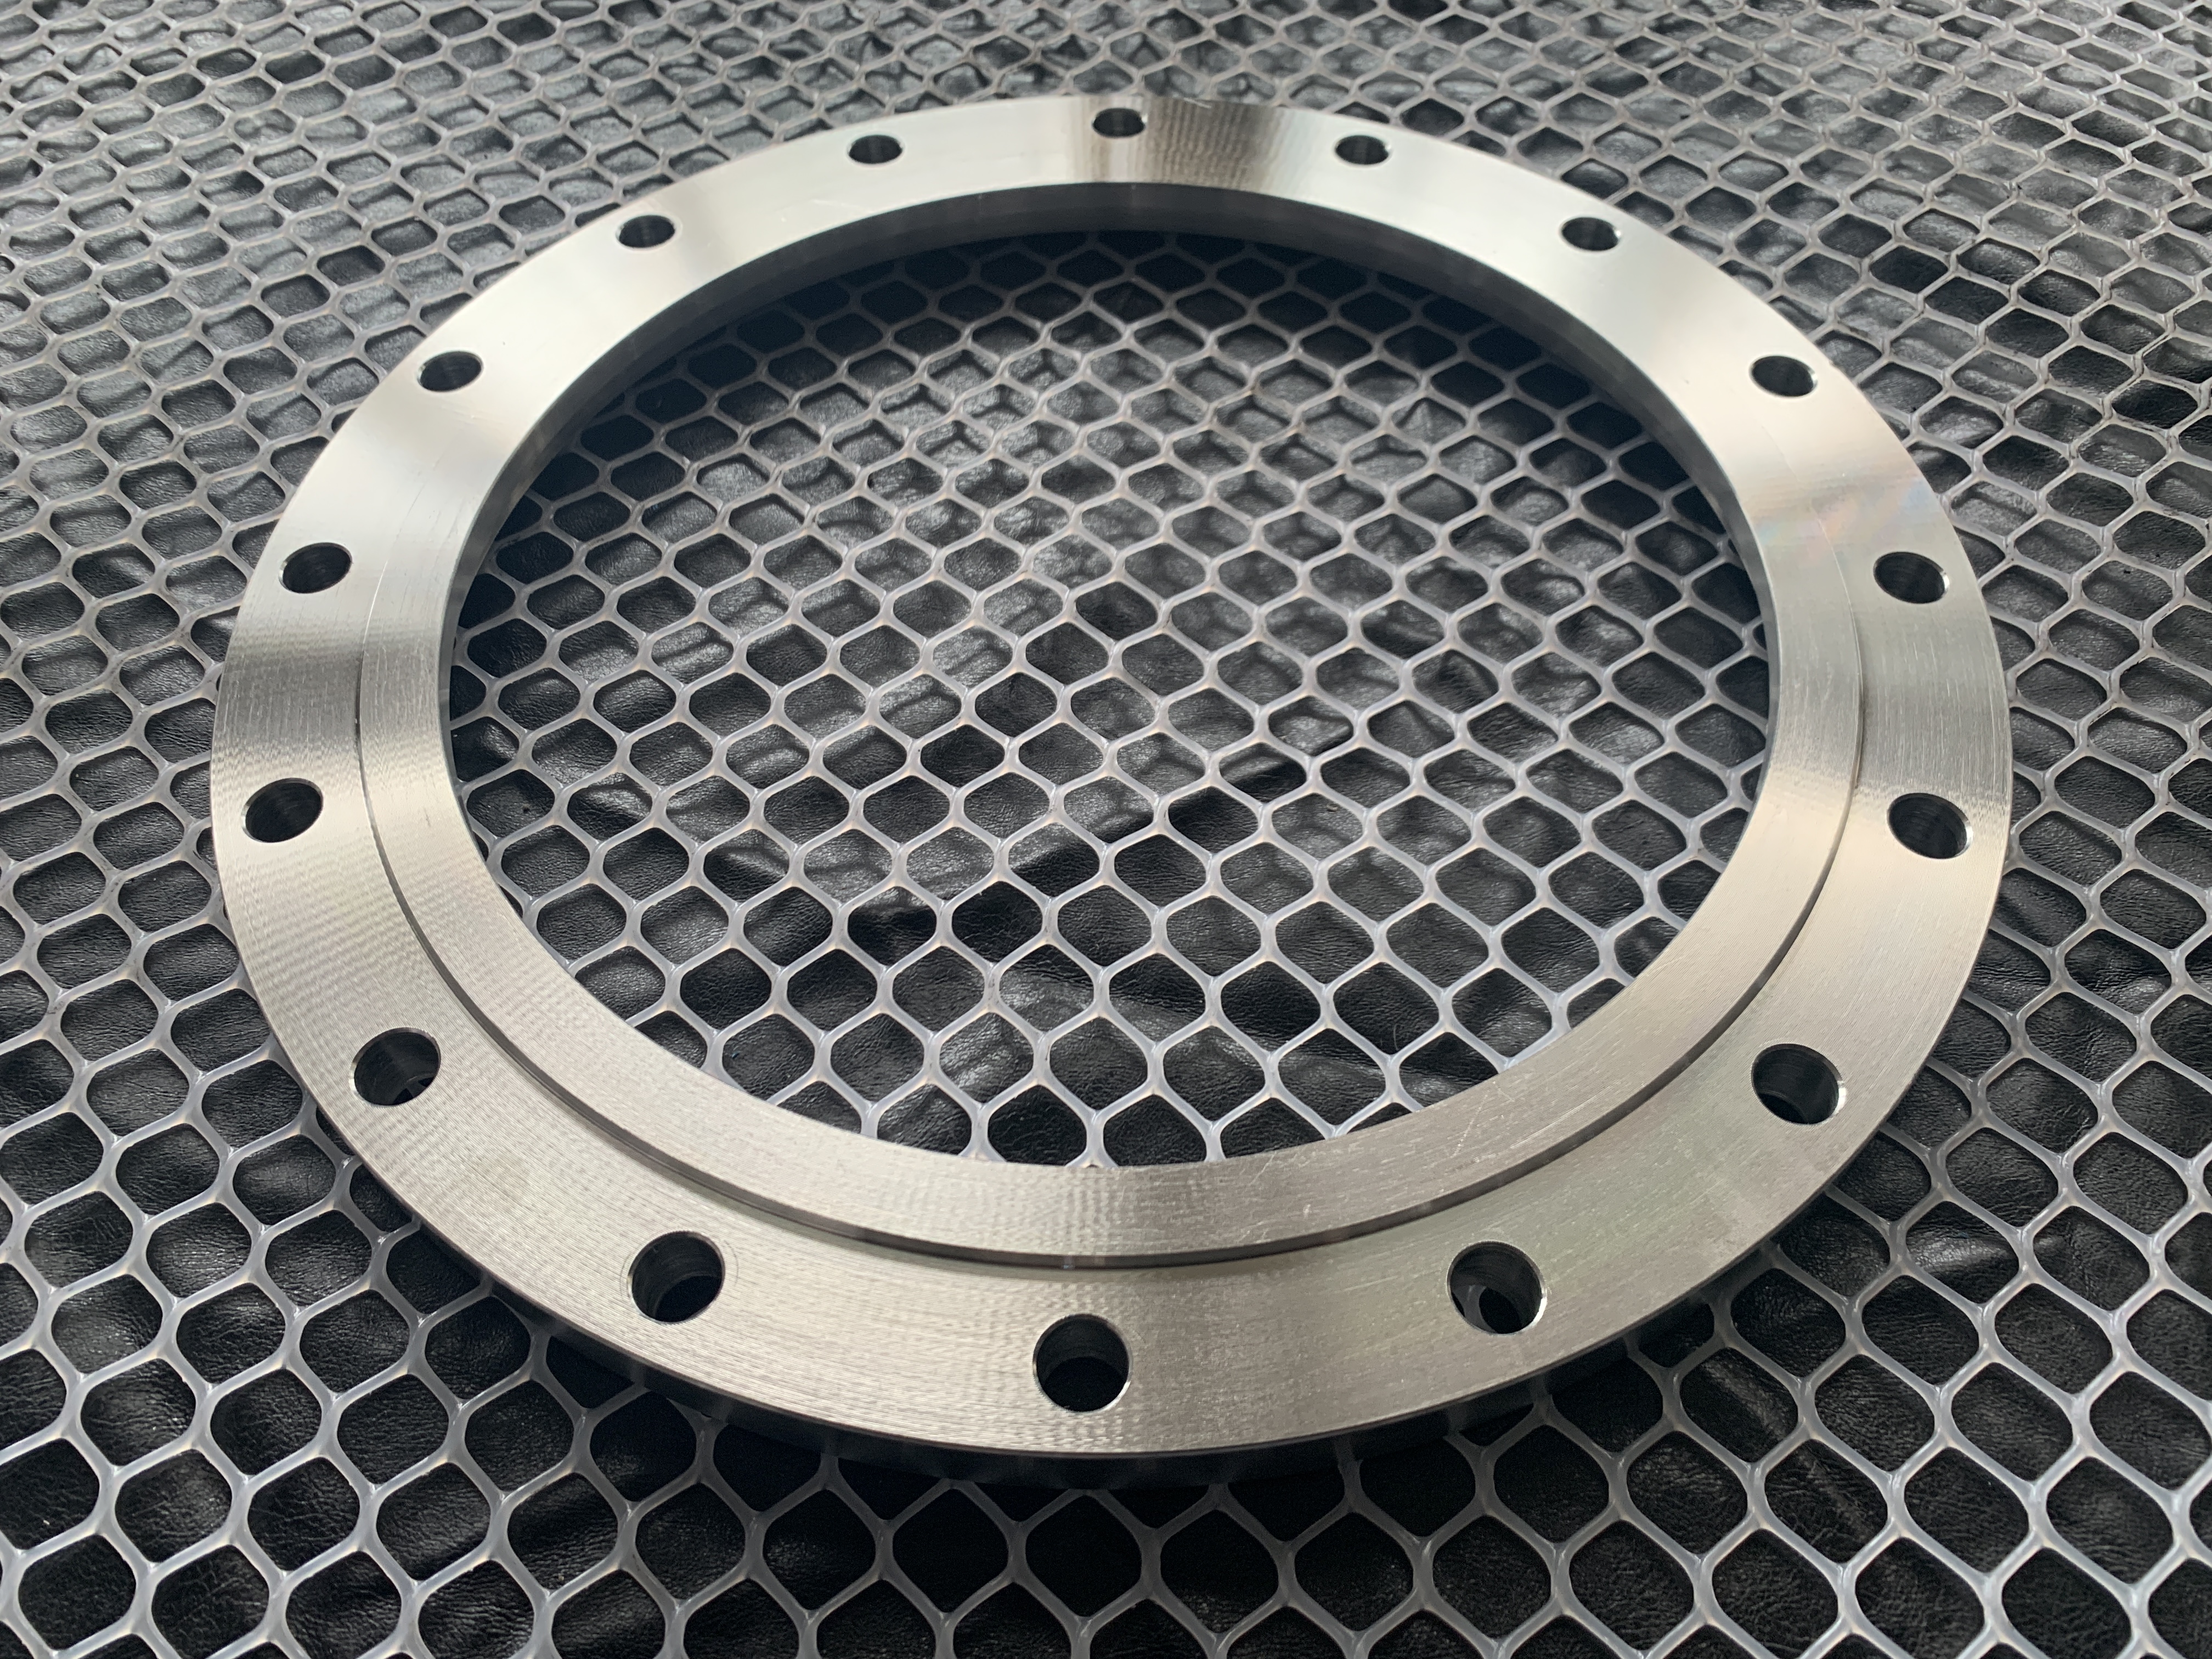 BS10 stainless steel Table E Backing Flange Fitting CDPL045